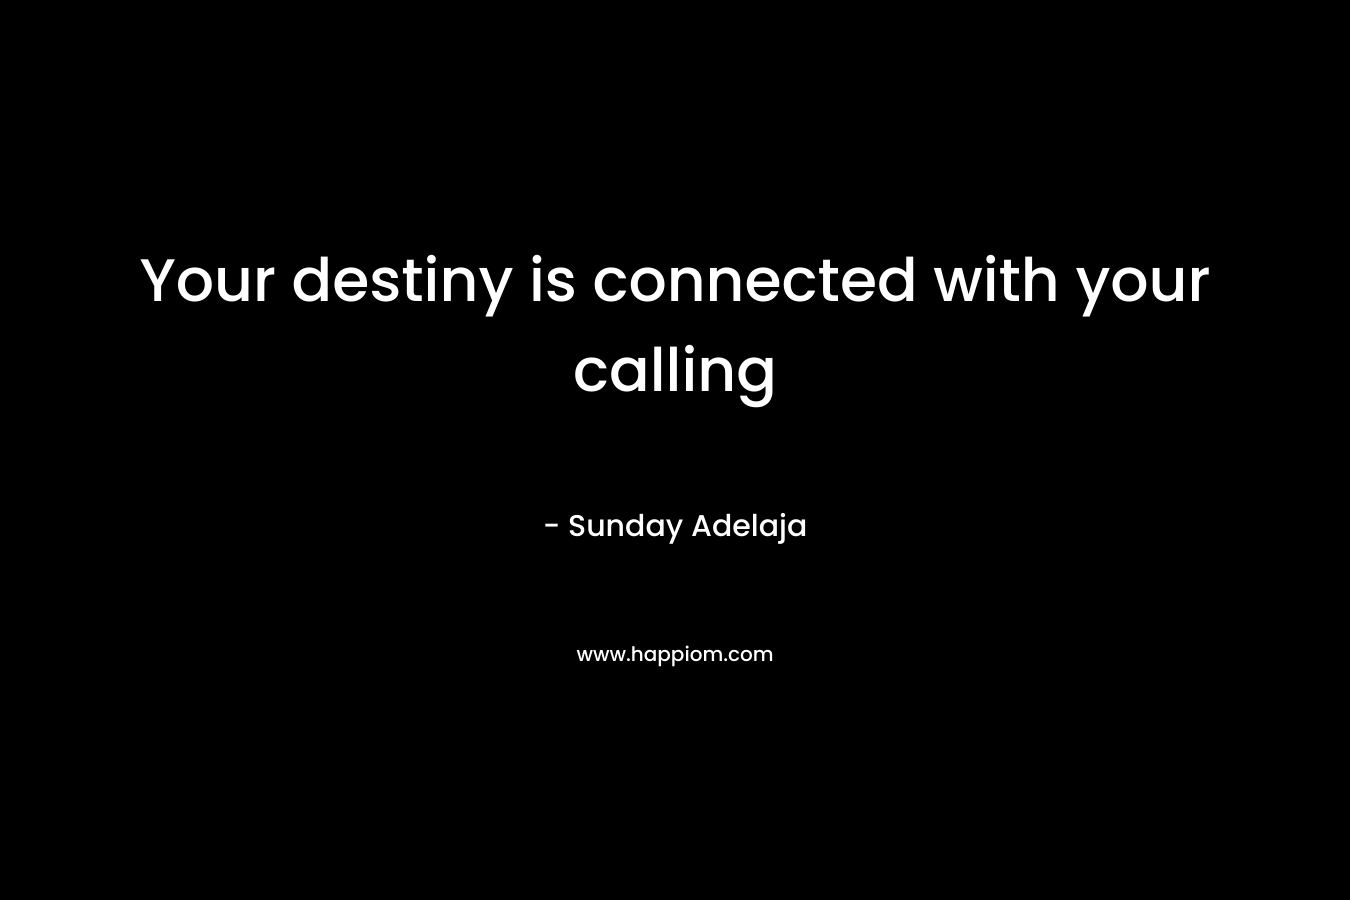 Your destiny is connected with your calling